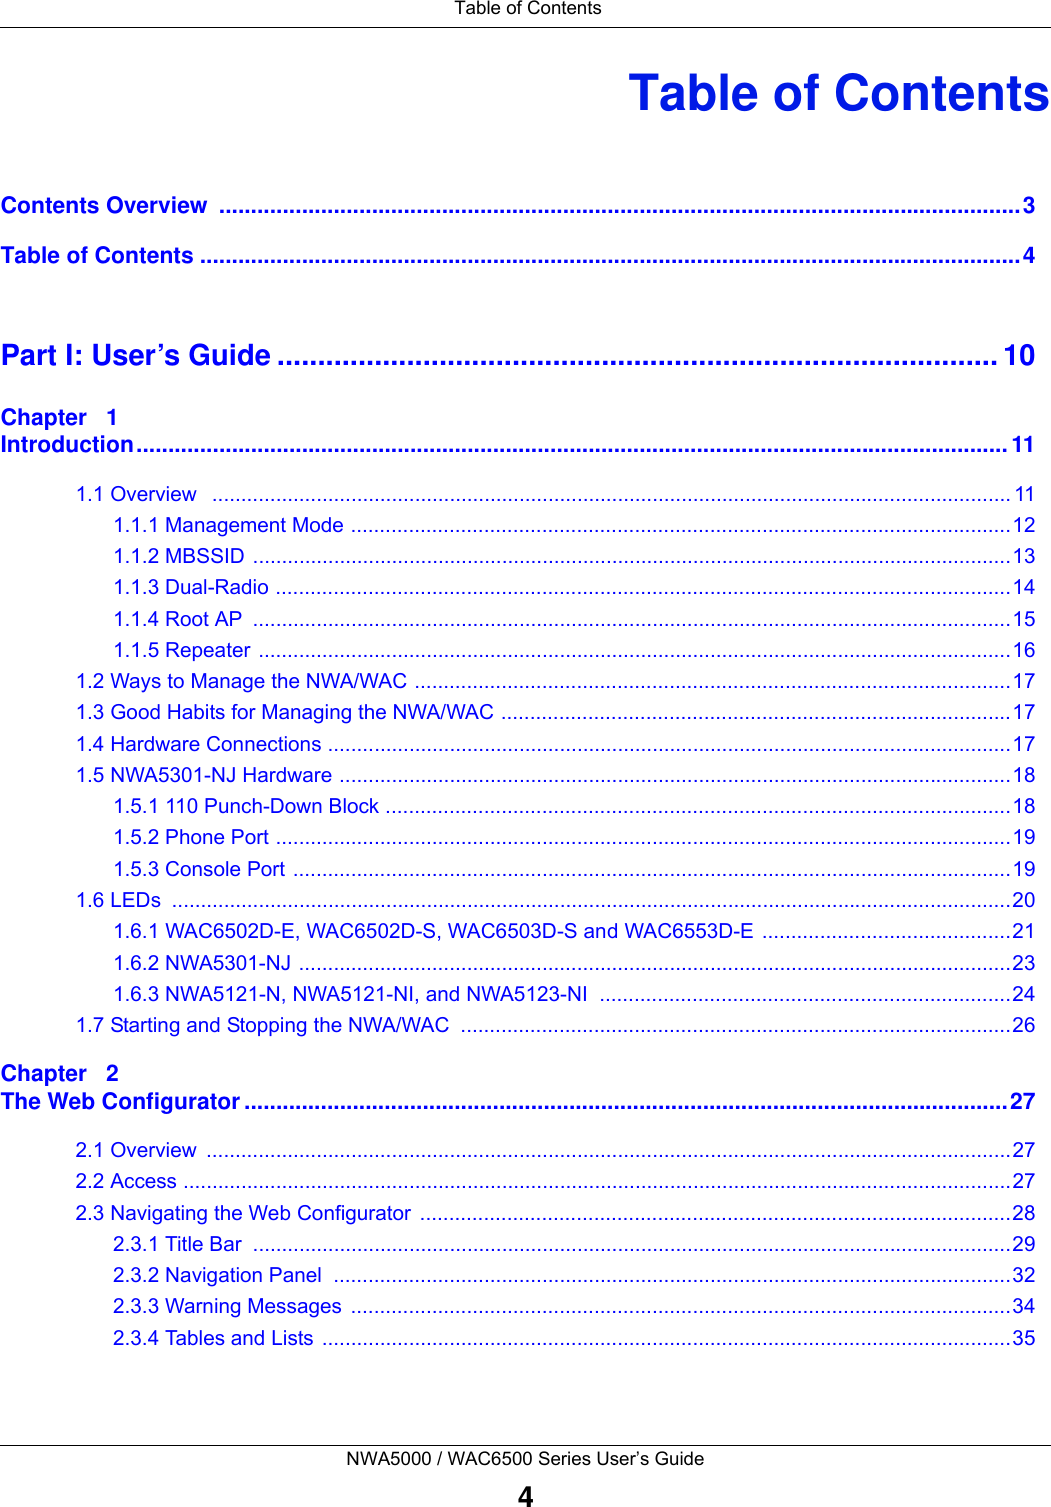 Table of ContentsNWA5000 / WAC6500 Series User’s Guide4Table of ContentsContents Overview  ..............................................................................................................................3Table of Contents .................................................................................................................................4Part I: User’s Guide ......................................................................................... 10Chapter   1Introduction......................................................................................................................................... 111.1 Overview   .......................................................................................................................................... 111.1.1 Management Mode ..................................................................................................................121.1.2 MBSSID ...................................................................................................................................131.1.3 Dual-Radio ...............................................................................................................................141.1.4 Root AP  ...................................................................................................................................151.1.5 Repeater ..................................................................................................................................161.2 Ways to Manage the NWA/WAC .......................................................................................................171.3 Good Habits for Managing the NWA/WAC ........................................................................................171.4 Hardware Connections ......................................................................................................................171.5 NWA5301-NJ Hardware ....................................................................................................................181.5.1 110 Punch-Down Block ............................................................................................................181.5.2 Phone Port ...............................................................................................................................191.5.3 Console Port ............................................................................................................................191.6 LEDs  .................................................................................................................................................201.6.1 WAC6502D-E, WAC6502D-S, WAC6503D-S and WAC6553D-E ...........................................211.6.2 NWA5301-NJ ...........................................................................................................................231.6.3 NWA5121-N, NWA5121-NI, and NWA5123-NI  .......................................................................241.7 Starting and Stopping the NWA/WAC  ...............................................................................................26Chapter   2The Web Configurator ........................................................................................................................272.1 Overview  ...........................................................................................................................................272.2 Access ...............................................................................................................................................272.3 Navigating the Web Configurator  ......................................................................................................282.3.1 Title Bar  ...................................................................................................................................292.3.2 Navigation Panel  .....................................................................................................................322.3.3 Warning Messages  ..................................................................................................................342.3.4 Tables and Lists .......................................................................................................................35